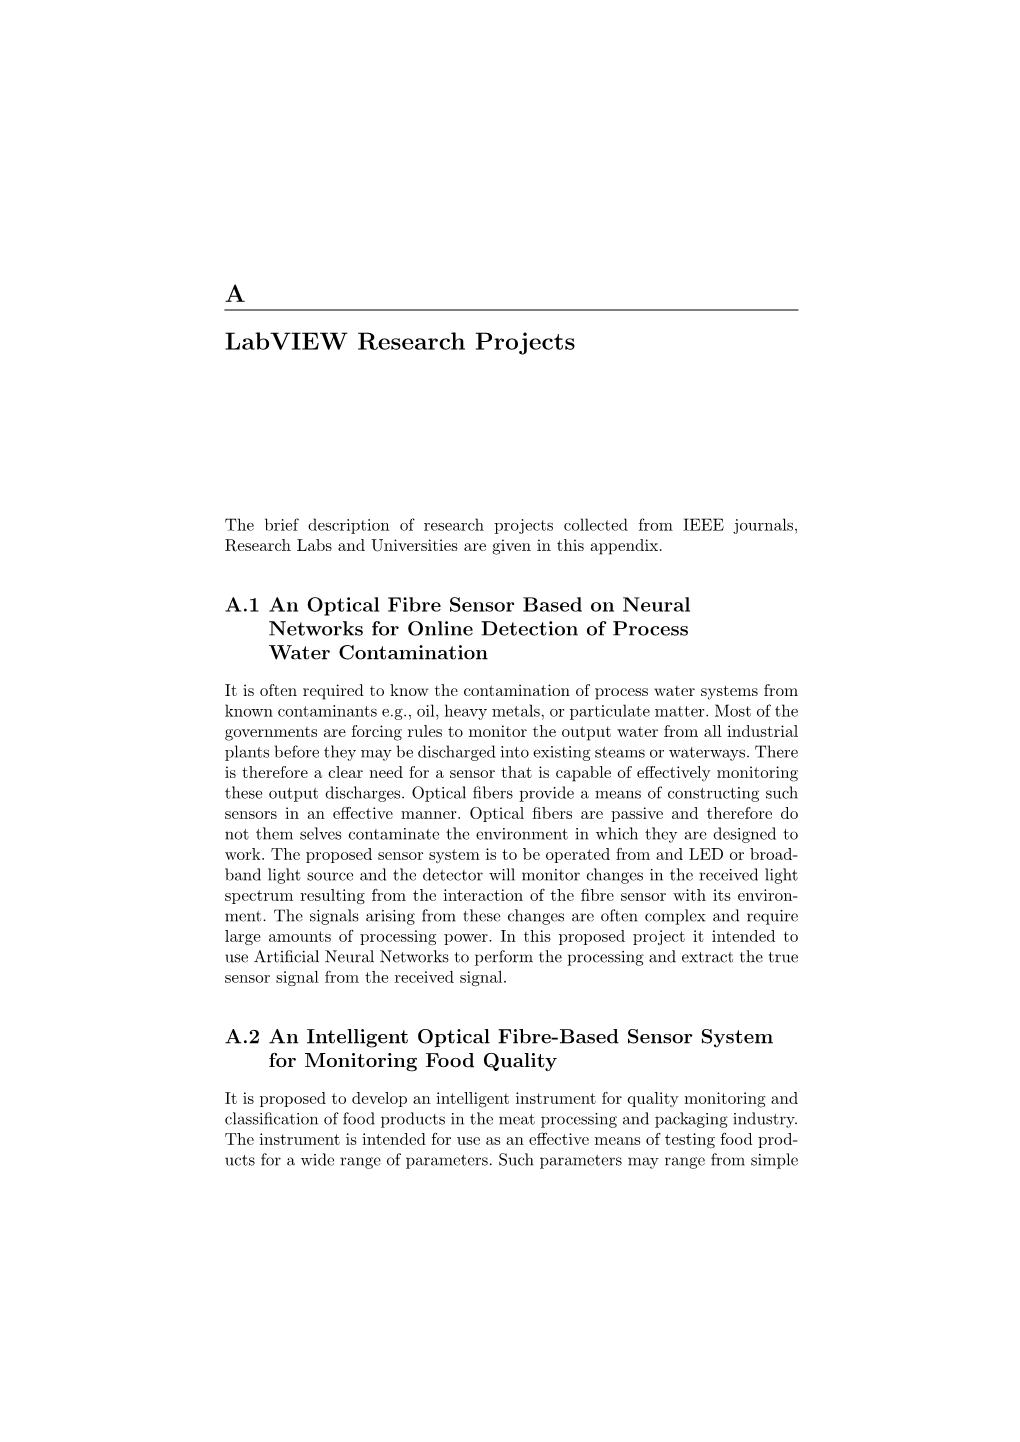 A Labview Research Projects